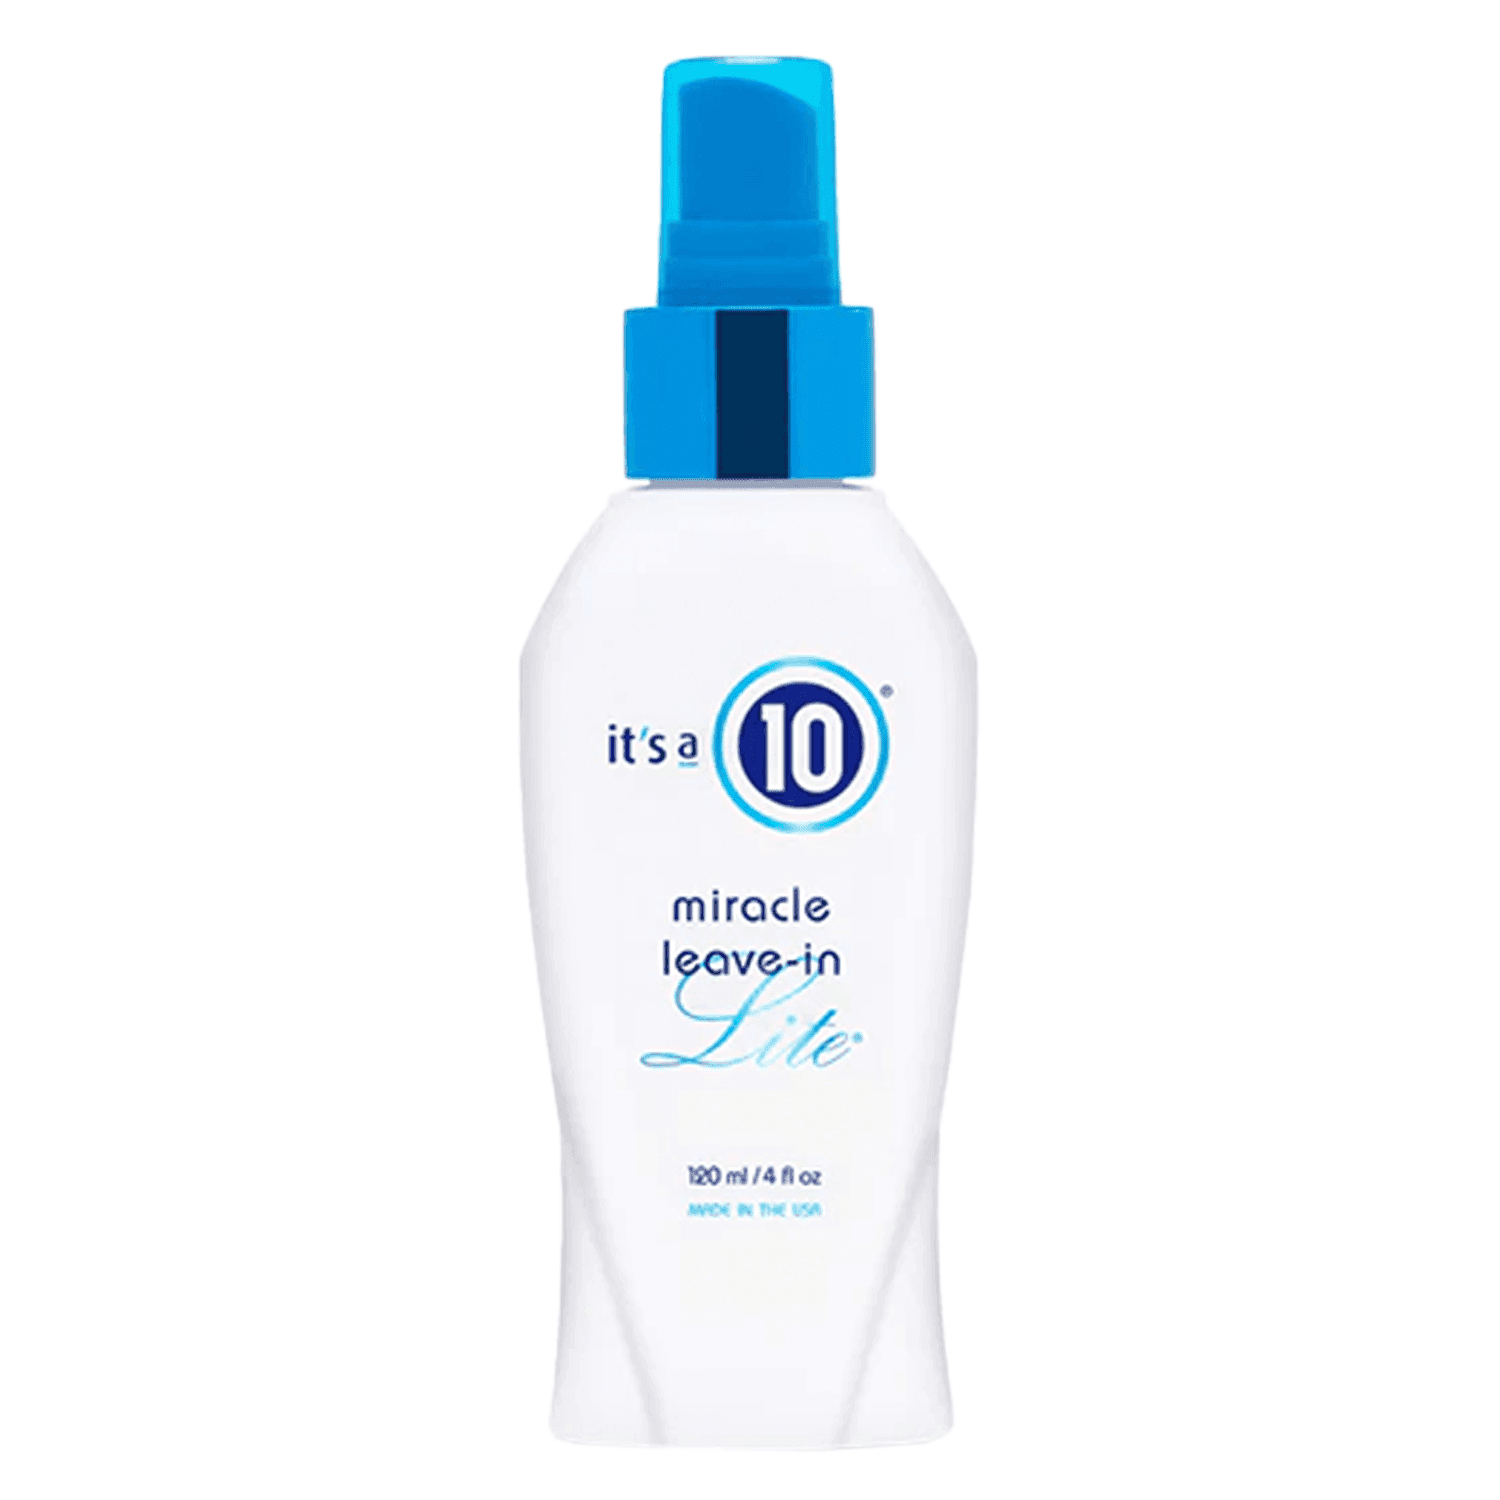 it's a 10 haircare - Miracle Lite Leave-In